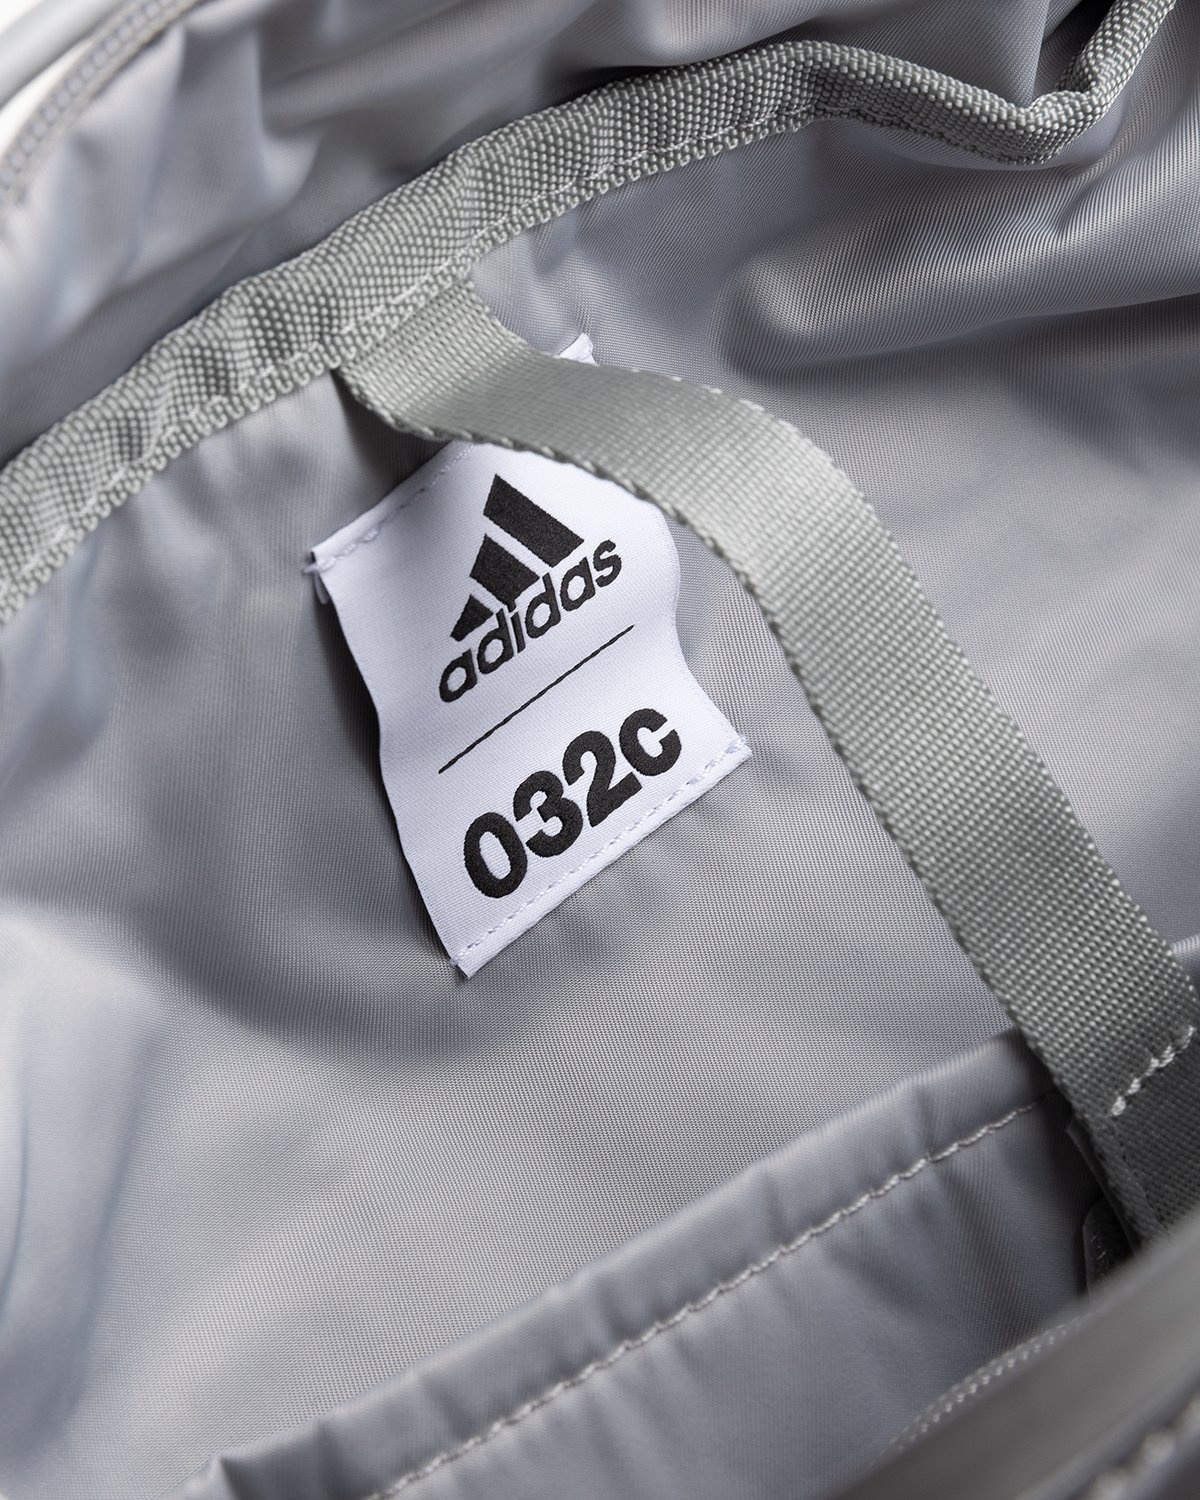 Adidas x 032c – Tote Greone - Bags - White - Image 3